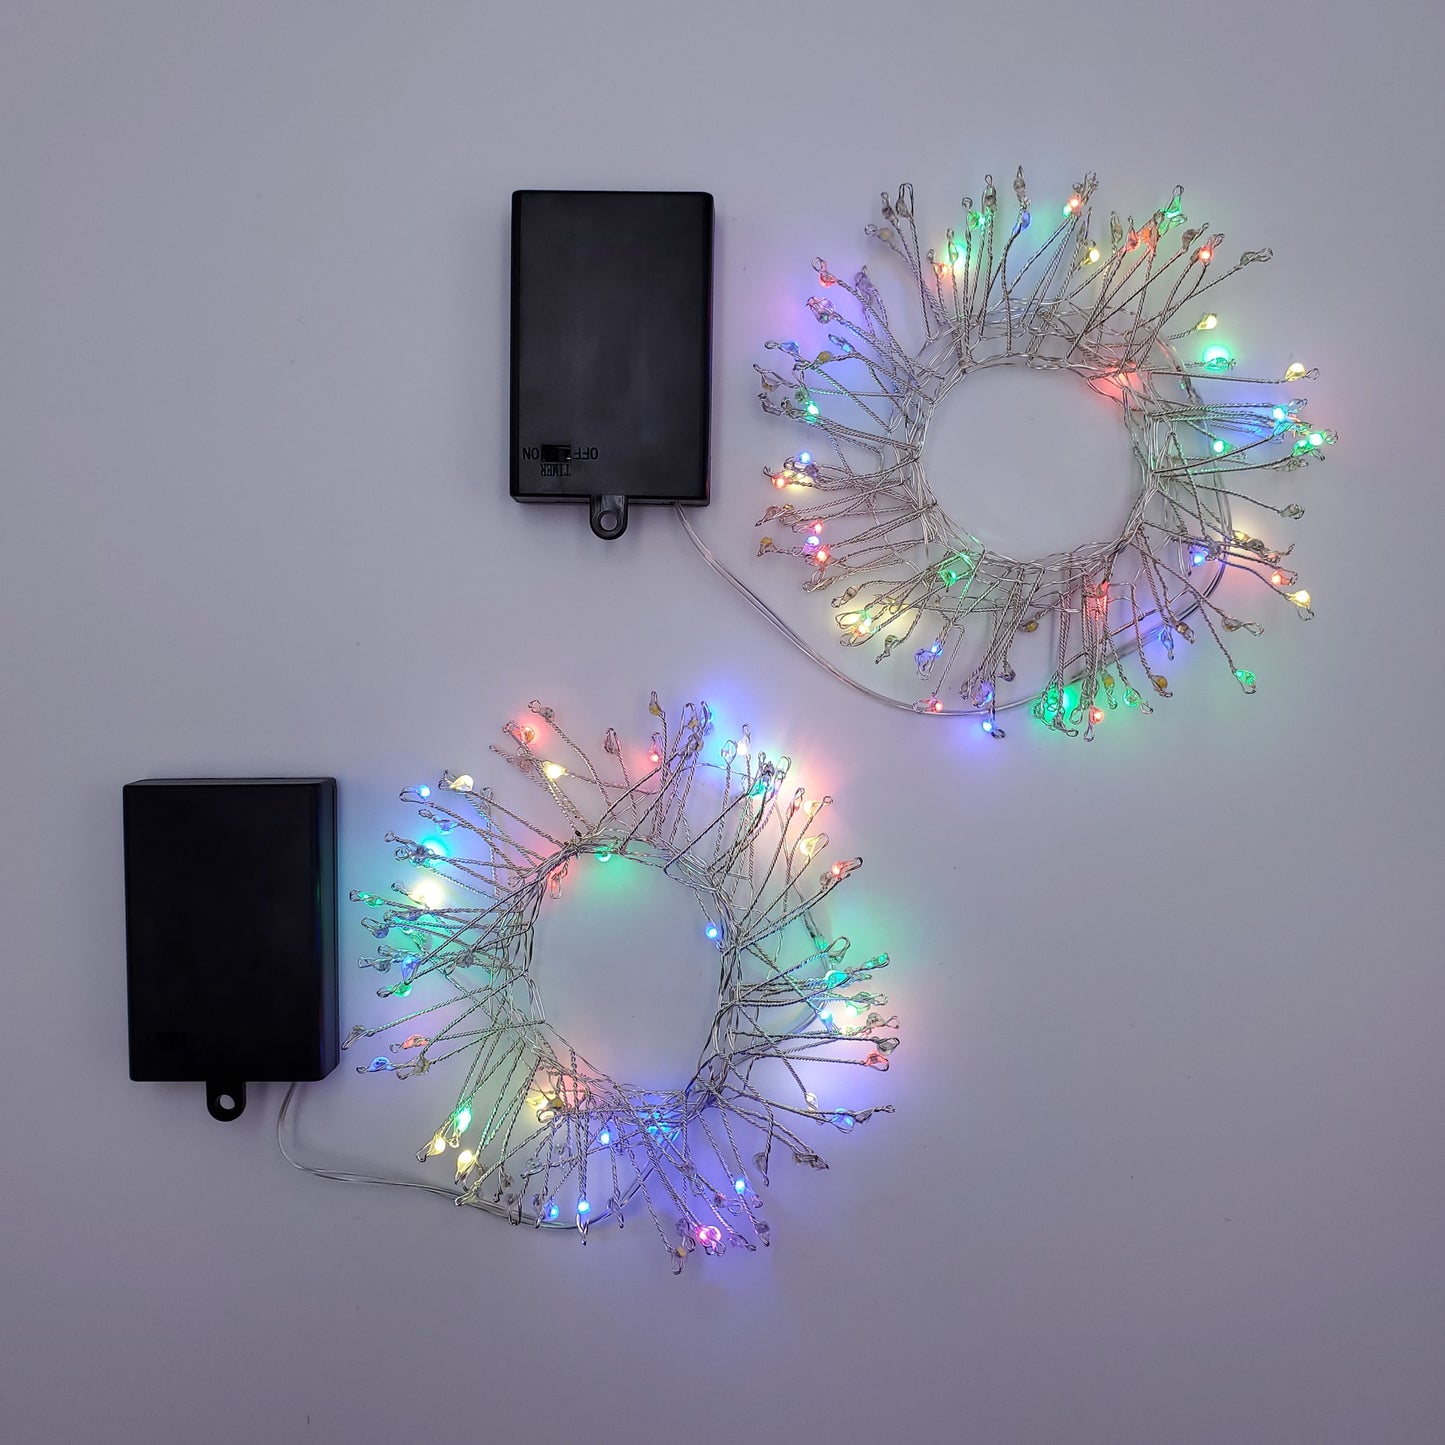 Battery Operated LED Firecracker Fairy String Lights - Set of 2 - Multicolor Lights with Silver Wire